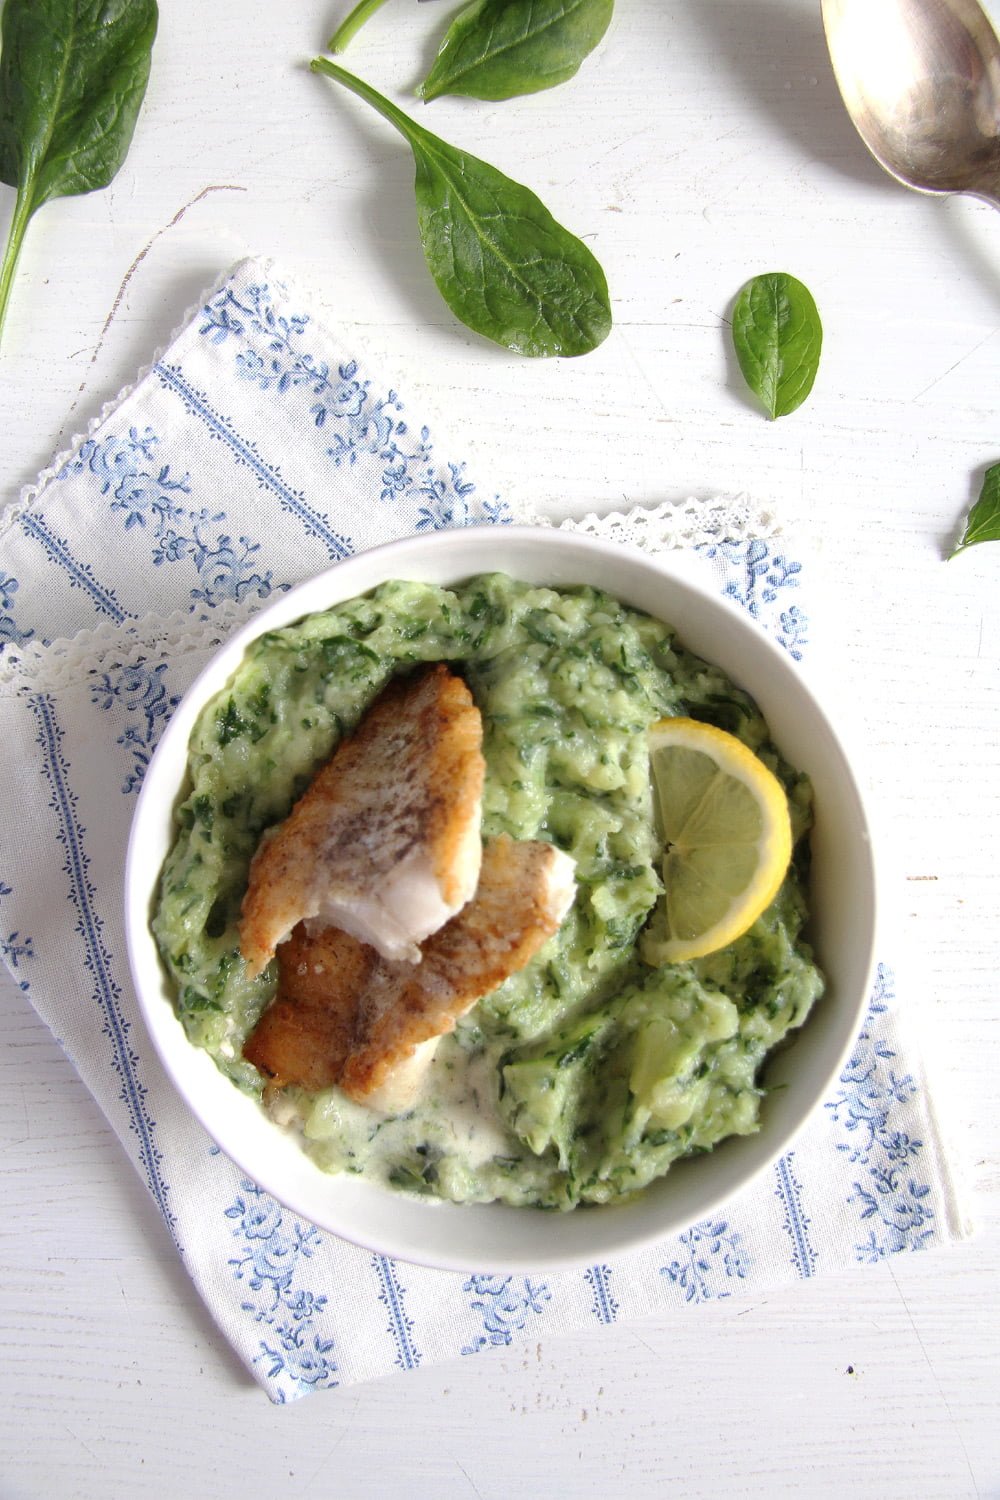 Spinach potato mash with fish and lemon in a bowl